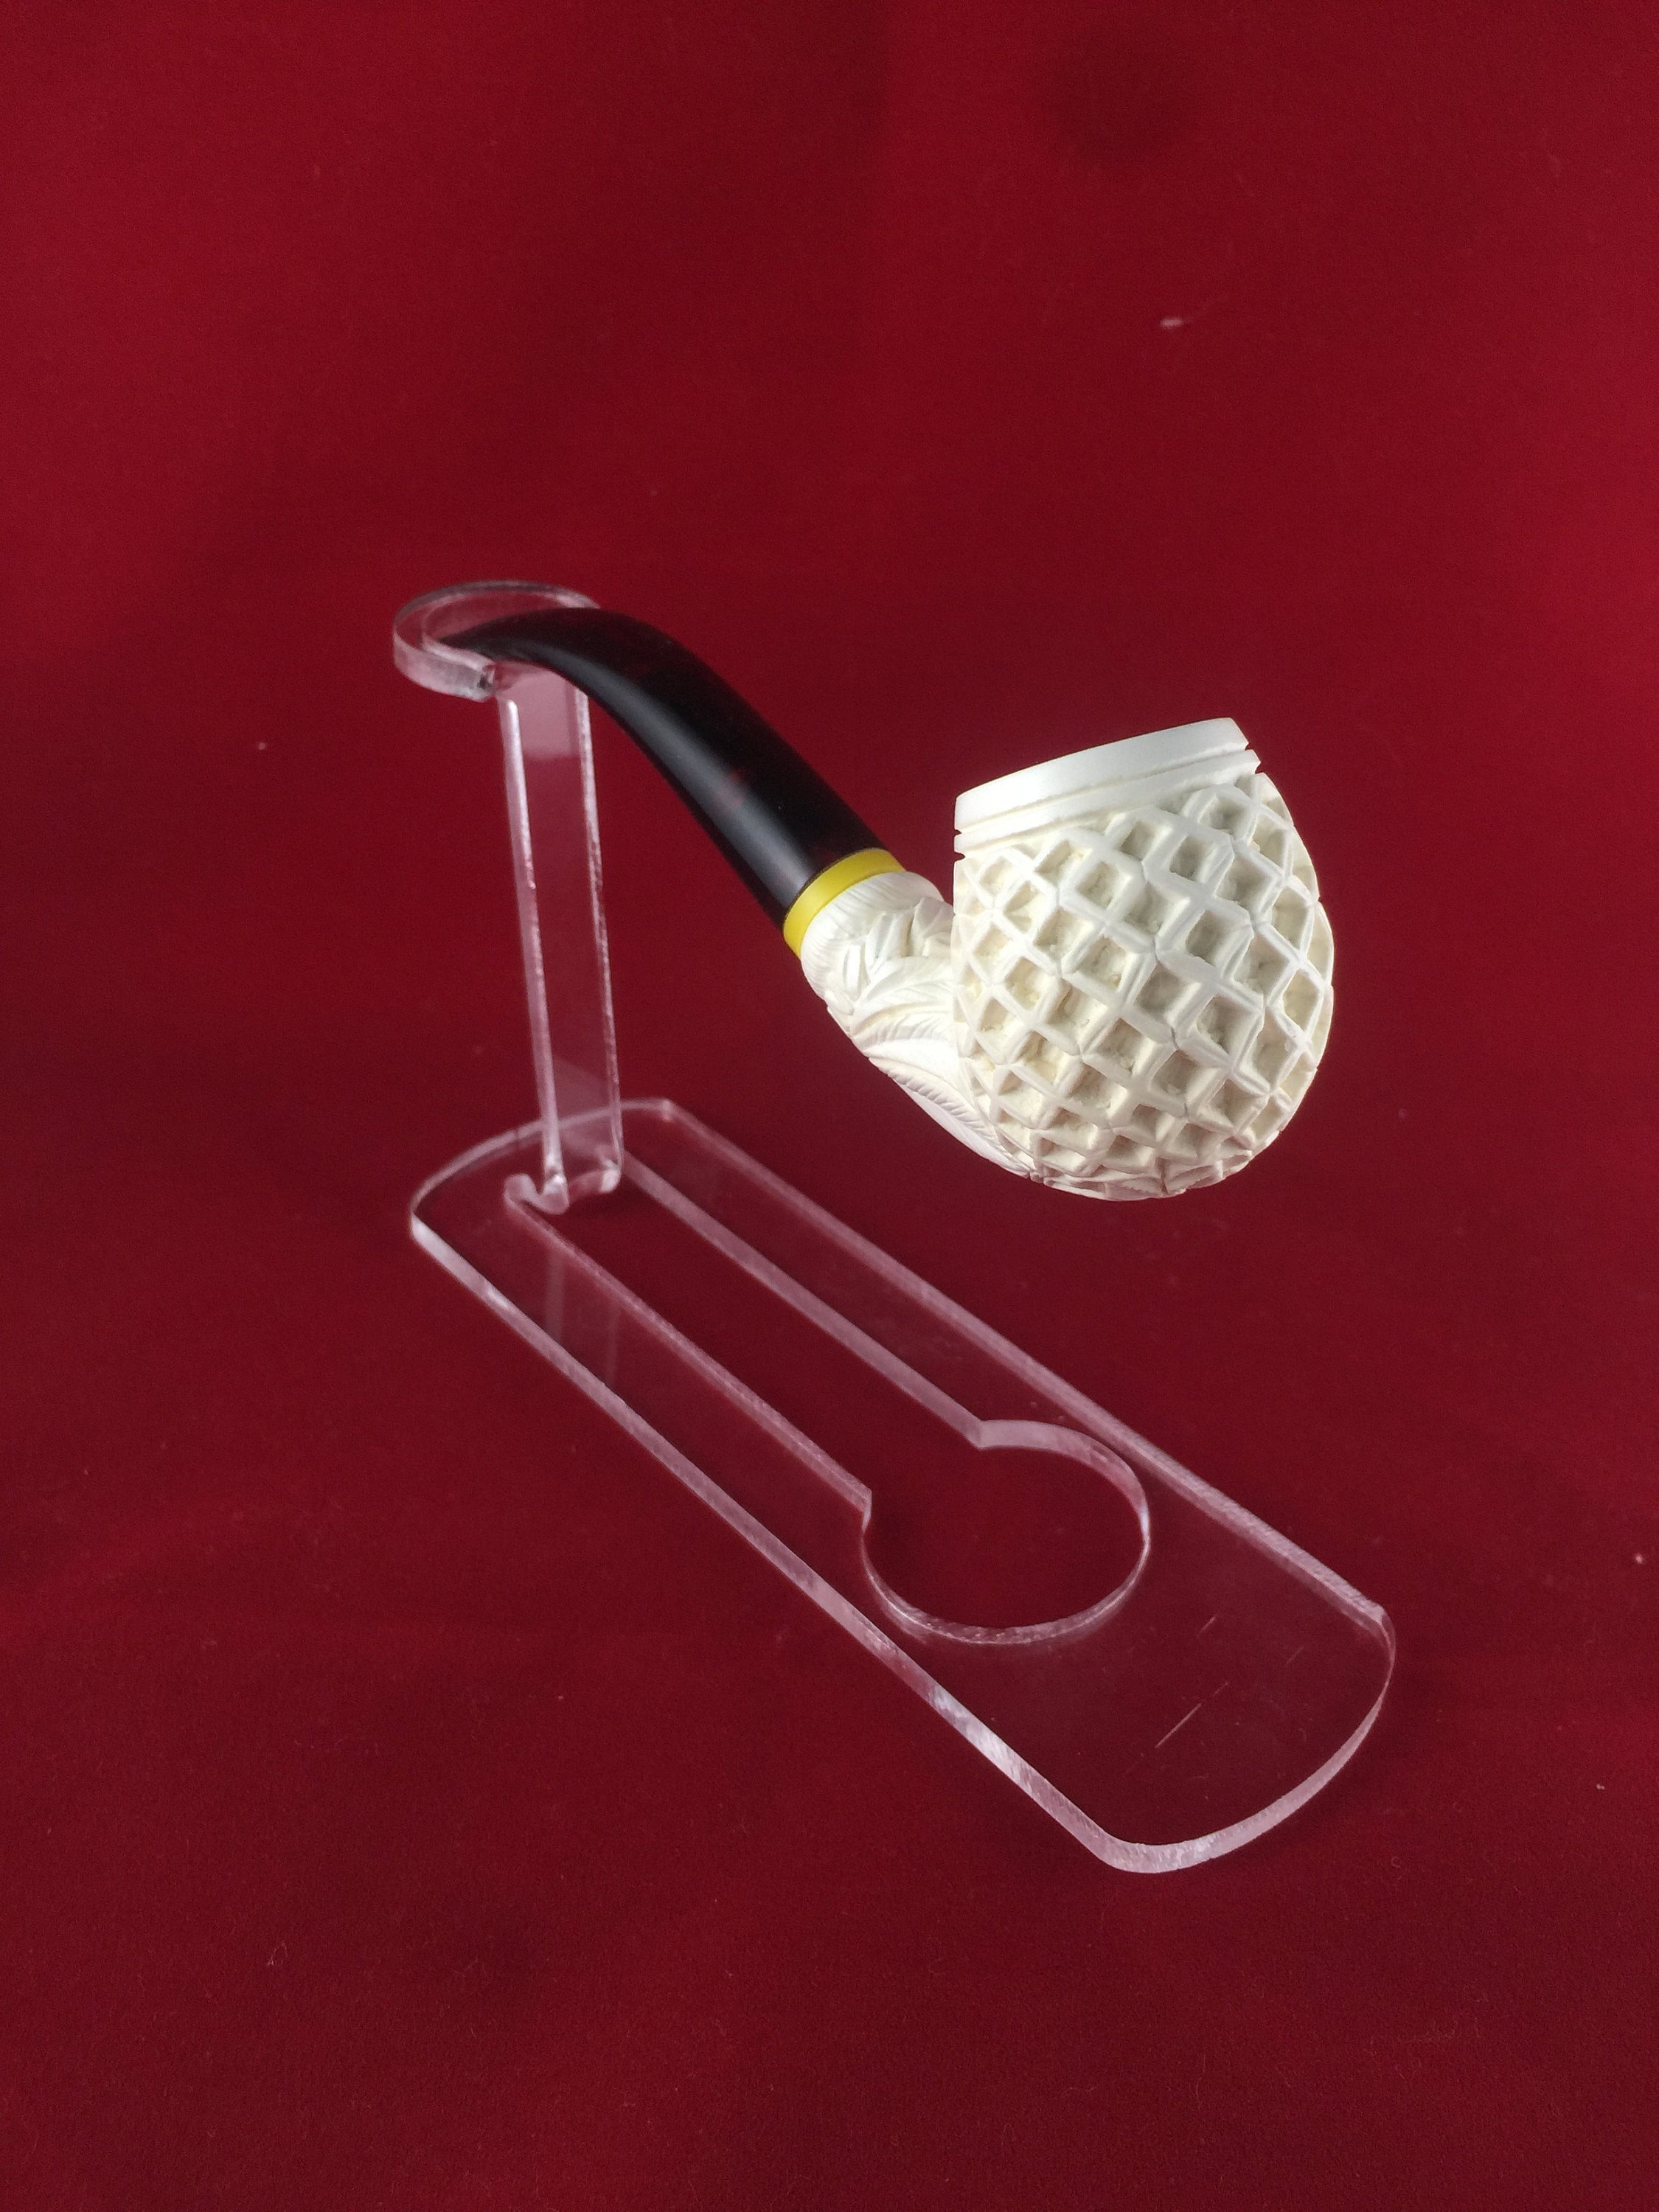 HAND CARVED BLOCK MEERSCHAUM "LARGE" SMOOTH STRAIGHT PIPE ** NEW in CASE ** 